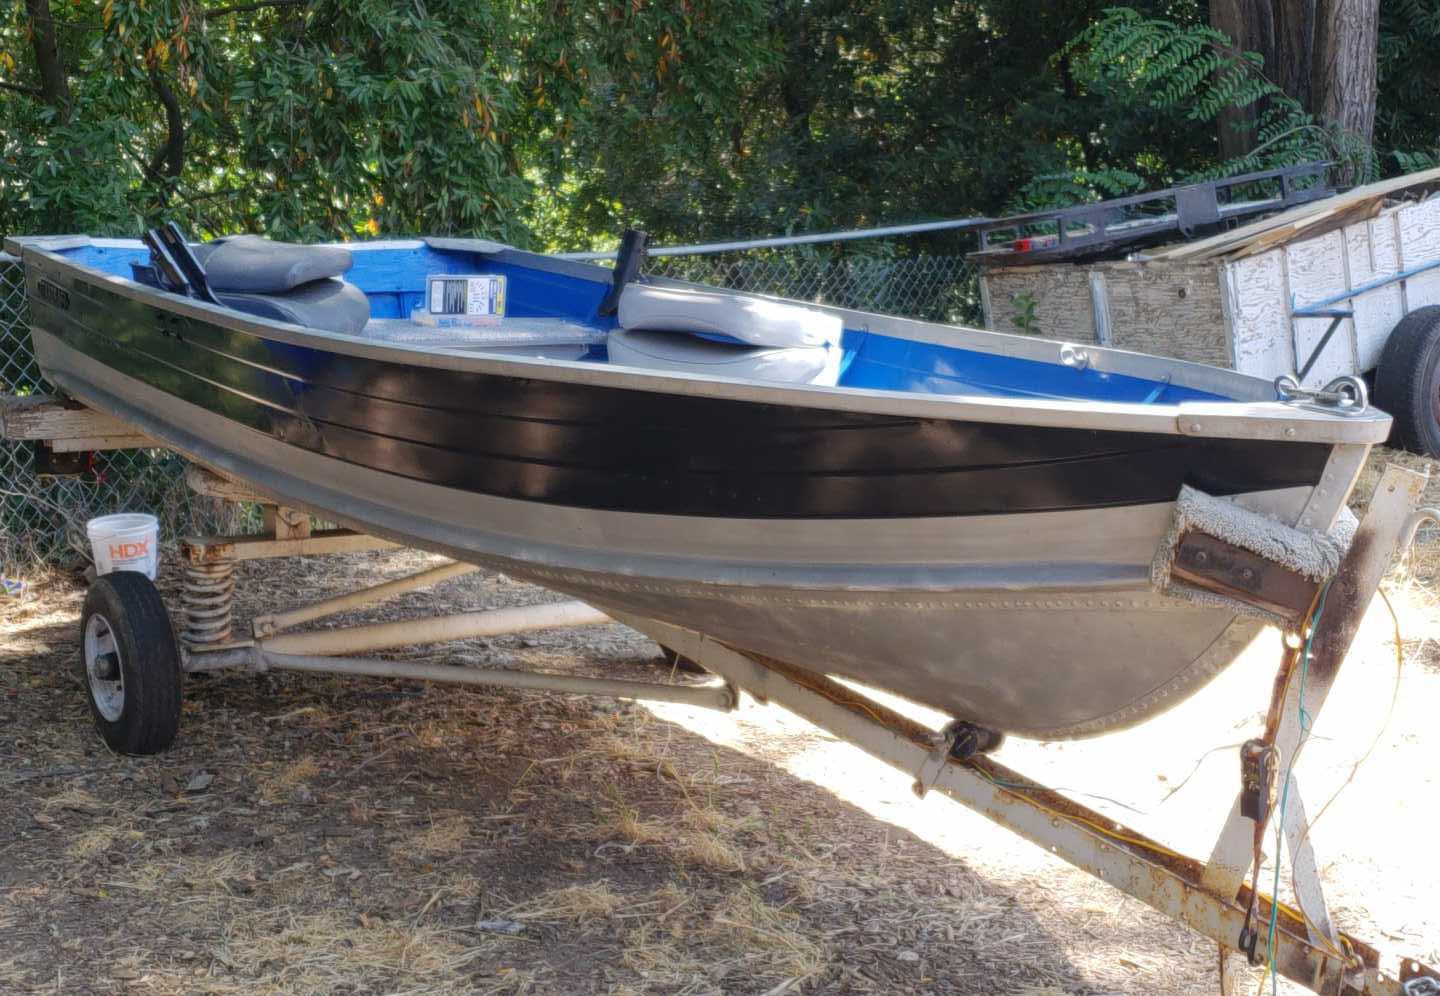 12ft aluminum boat with 20 and a 9.5 and 1 trolling